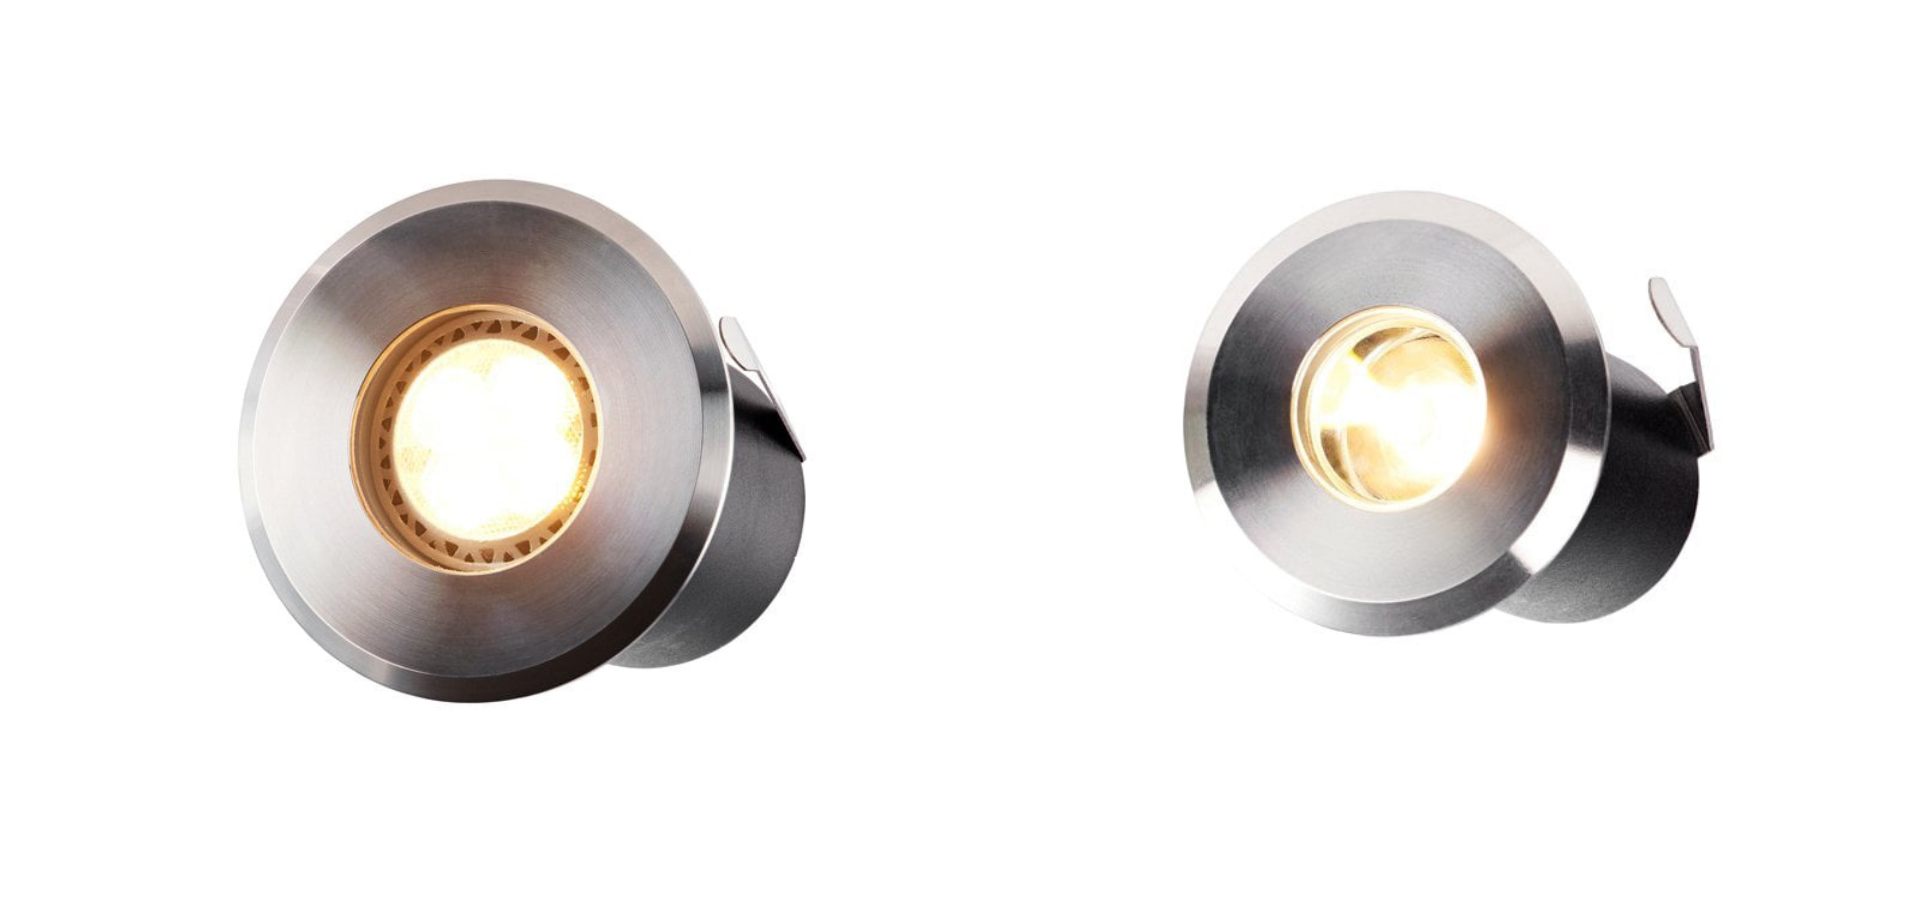 Two stainless steel deck lights